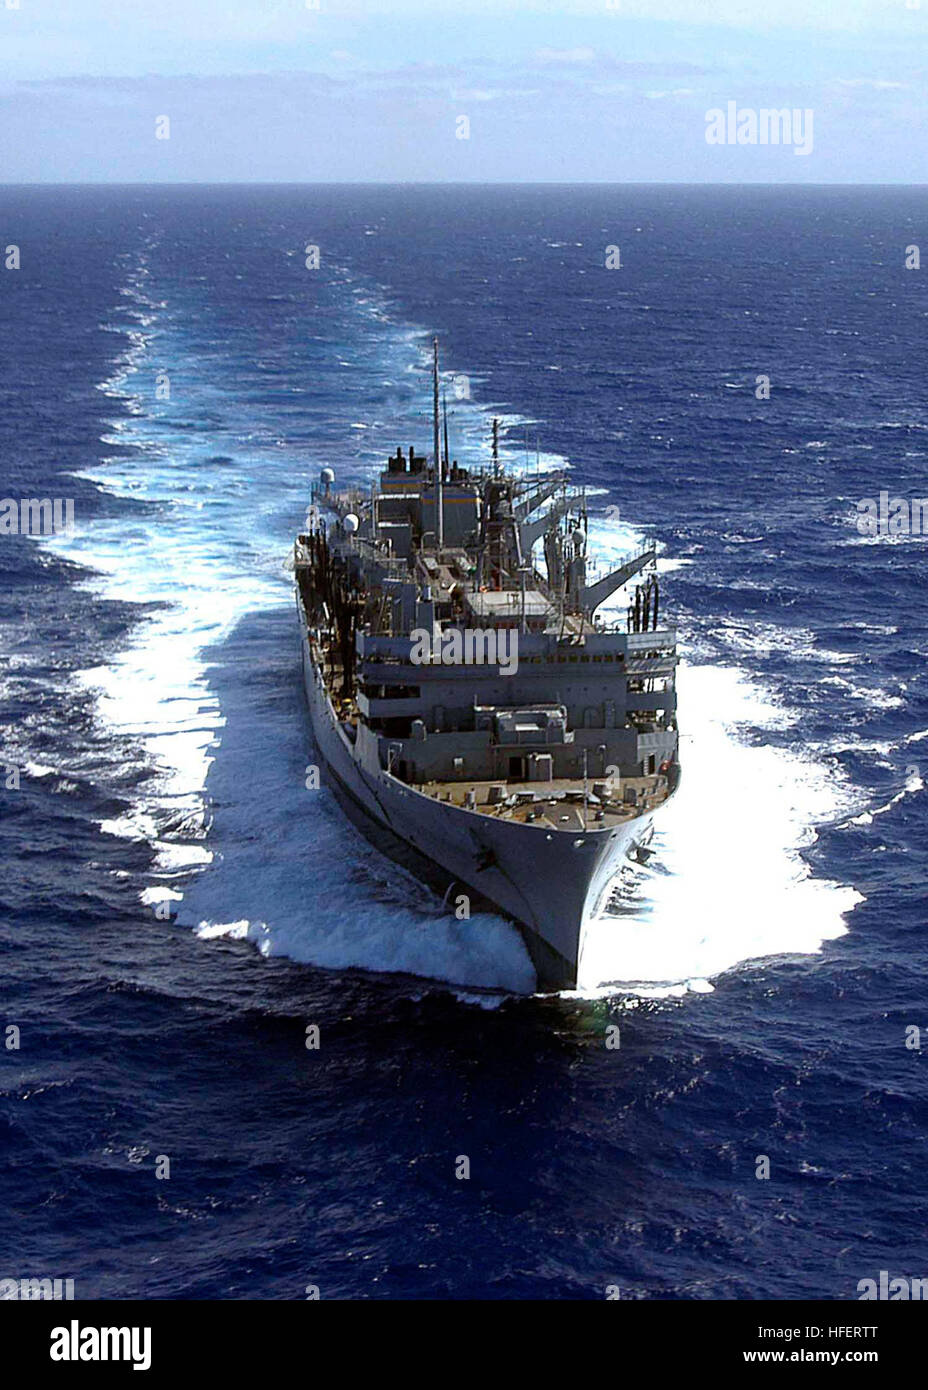 041207-N-5362F-065 Pacific Ocean (Dec. 7, 2004) Ð The Military Sealift Command (MSC) fast combat support ship USNS Rainier (T-AOE 7) underway in the Pacific Ocean. Rainier is currently deployed to the Western Pacific Ocean with the USS Abraham Lincoln (CVN 72) Carrier Strike Group. U.S. Navy photo by Photographer's Mate 3rd Class Bernardo Fuller (RELEASED) US Navy 041207-N-5362F-065 The Military Sealift Command (MSC) fast combat support ship USNS Rainier (T-AOE 7) underway in the Pacific Ocean Stock Photo